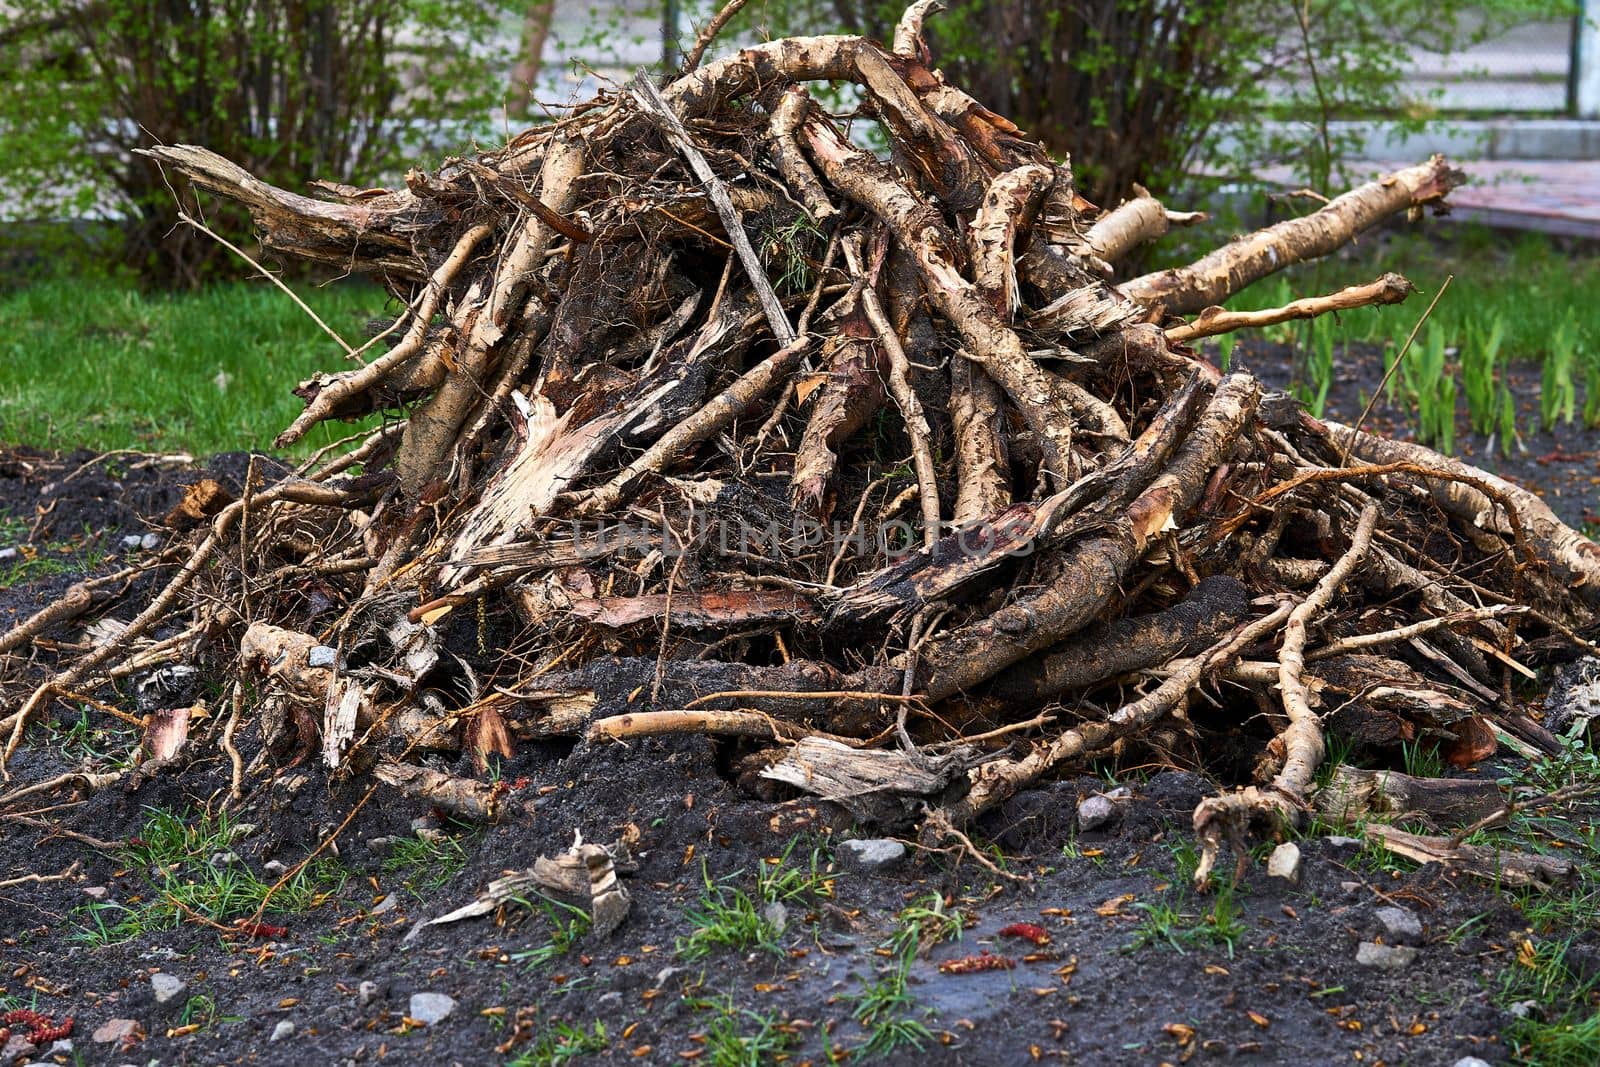 the part of a plant which attaches it to the ground or to a support, typically underground. A pile of garbage, roots, remains of trees after spring cleaning on a garden plot